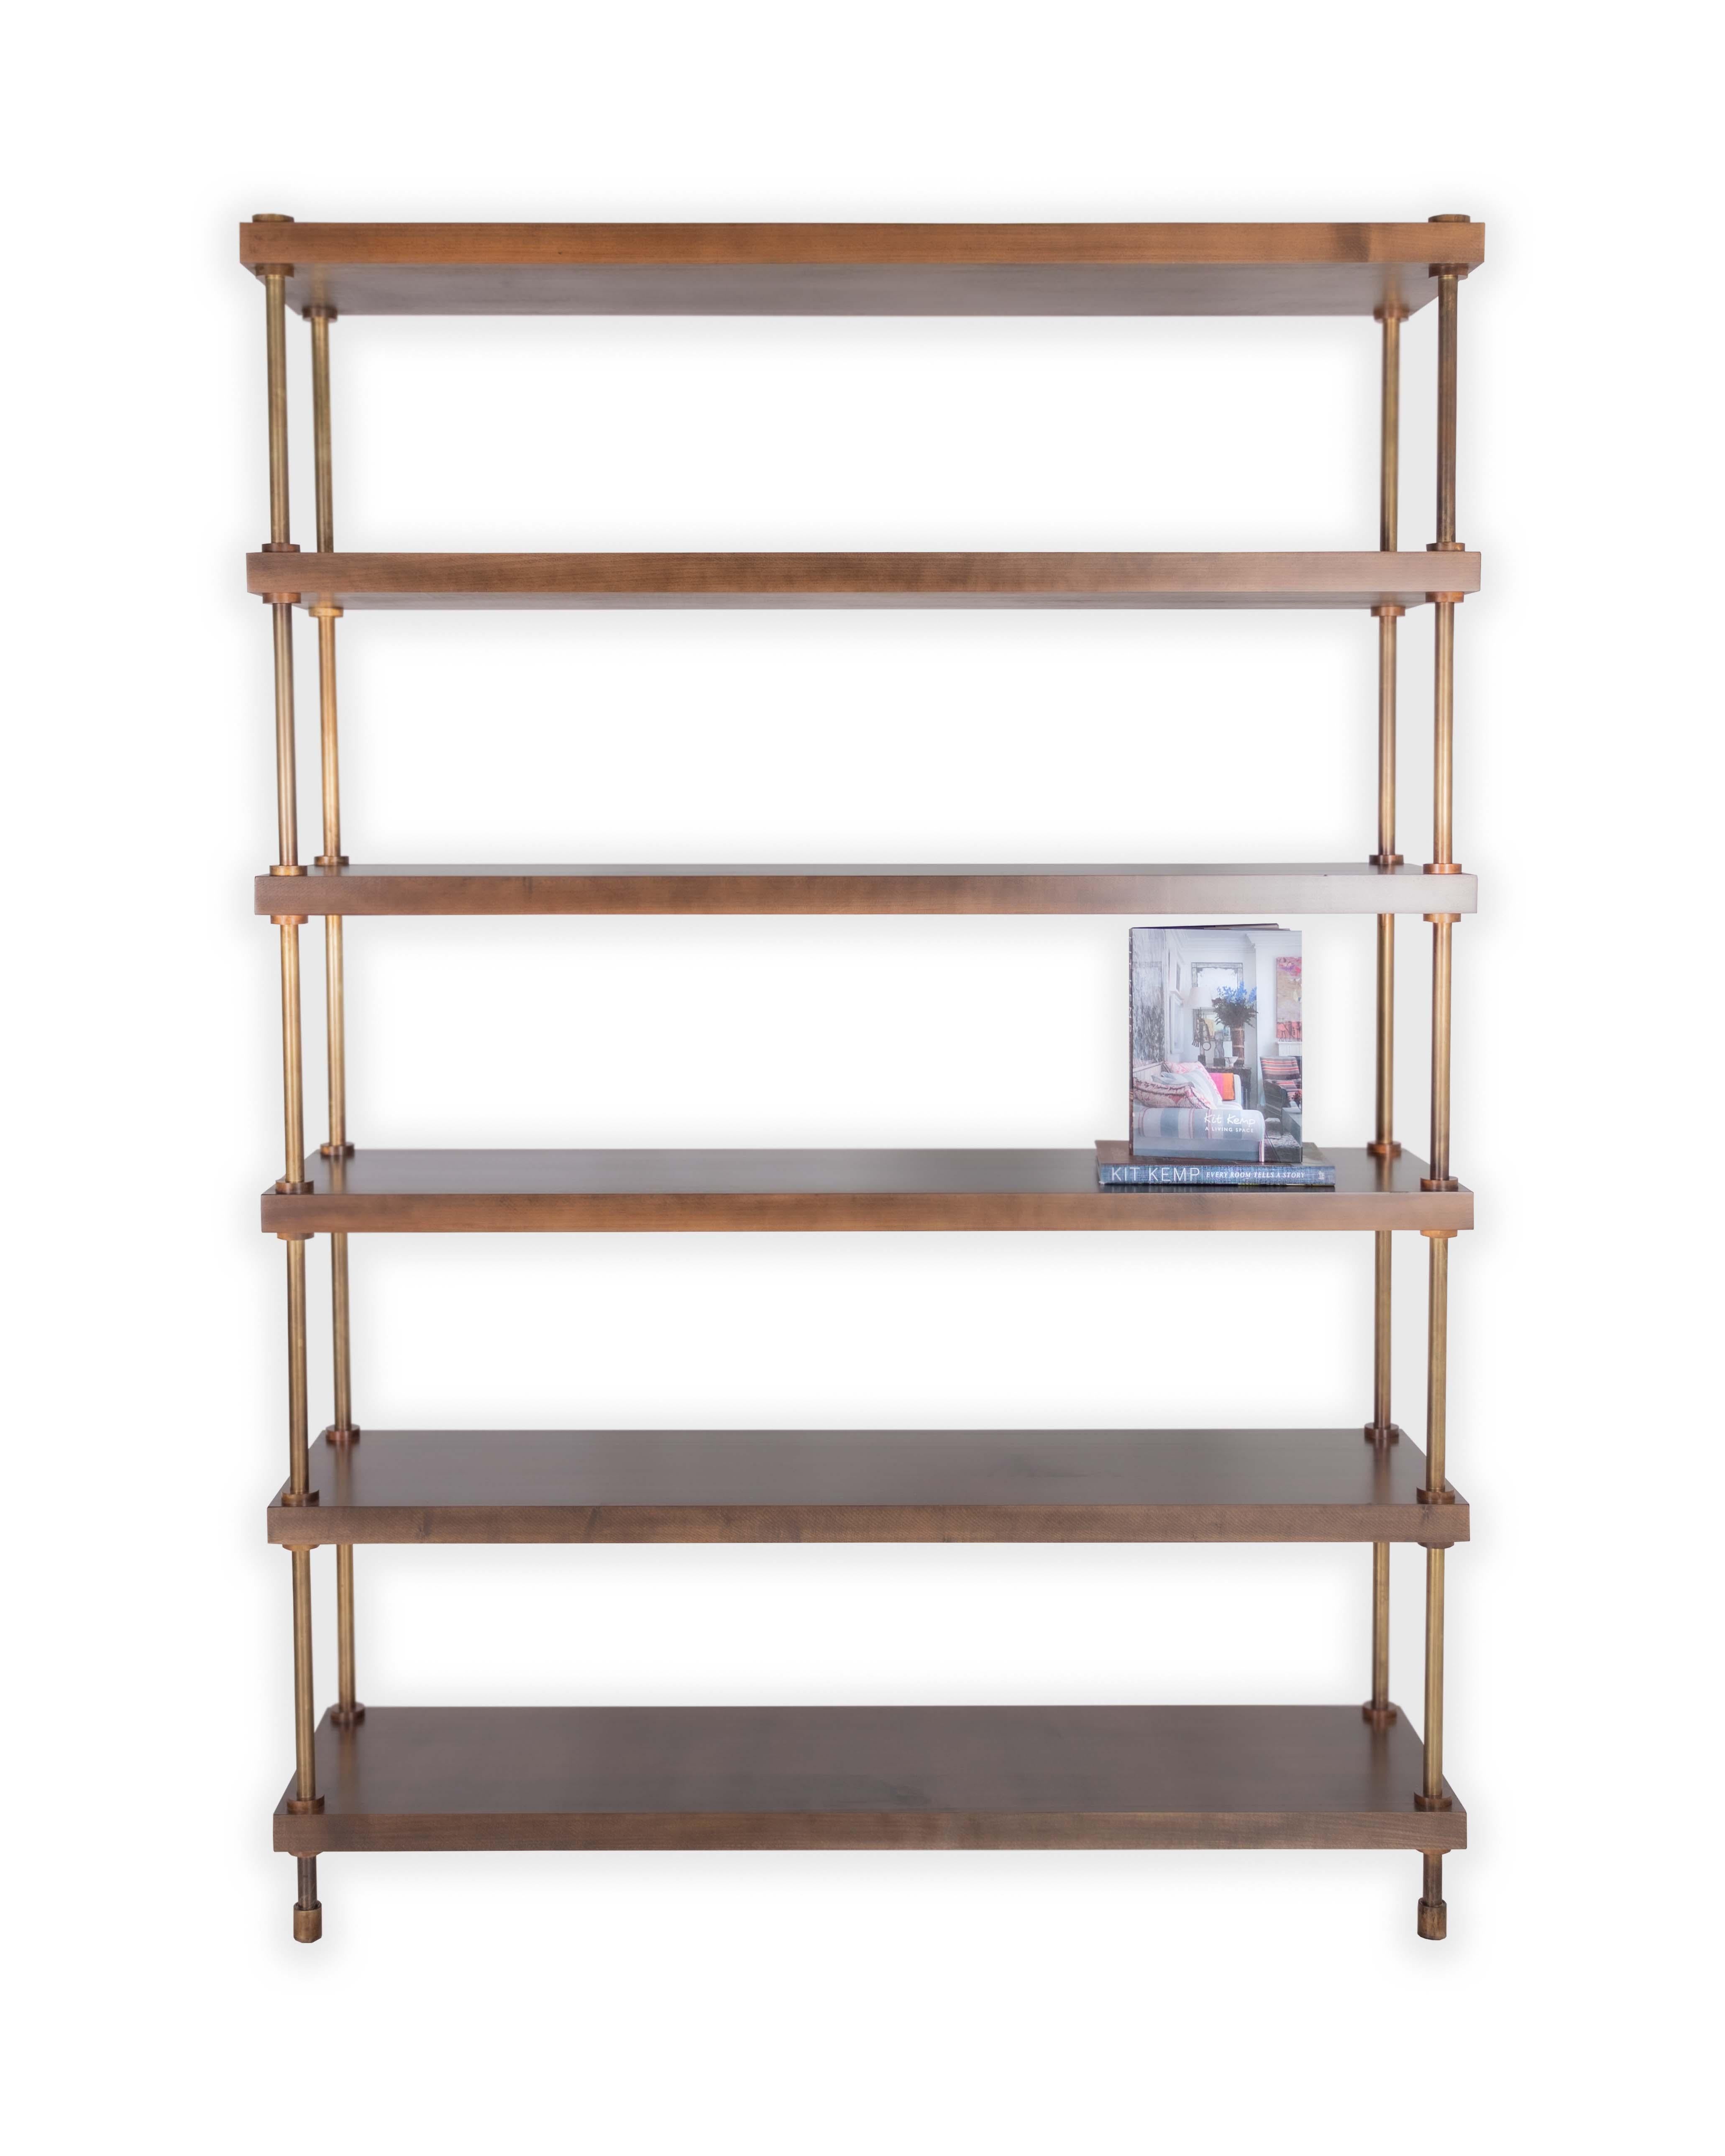 Contemporary Custom Modern Bookshelf in Soft Tawny Finish with Brass Accents For Sale